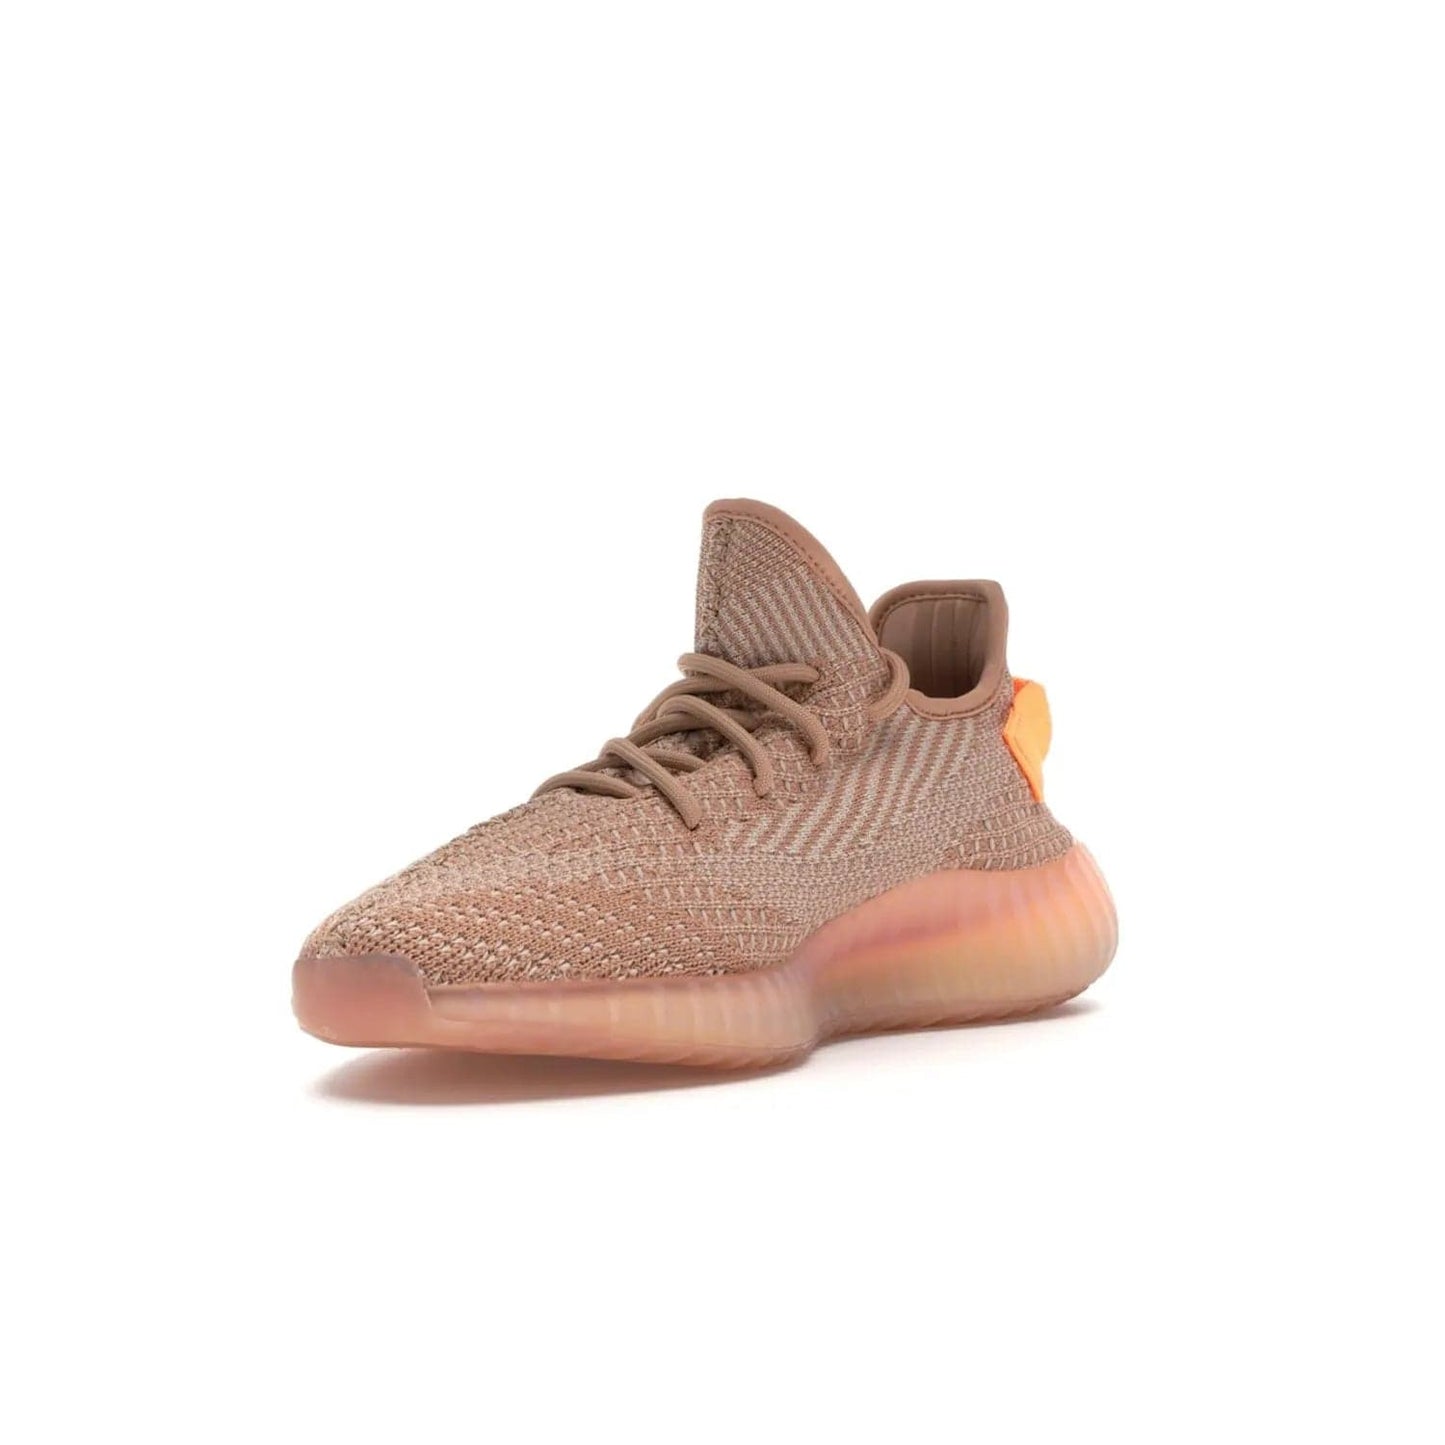 adidas Yeezy Boost 350 V2 Clay - Image 14 - Only at www.BallersClubKickz.com - The adidas Yeezy Boost 350 V2 Clay - style and swag in one shoe. Orange accents, clay midsole and sole. Get yours today!